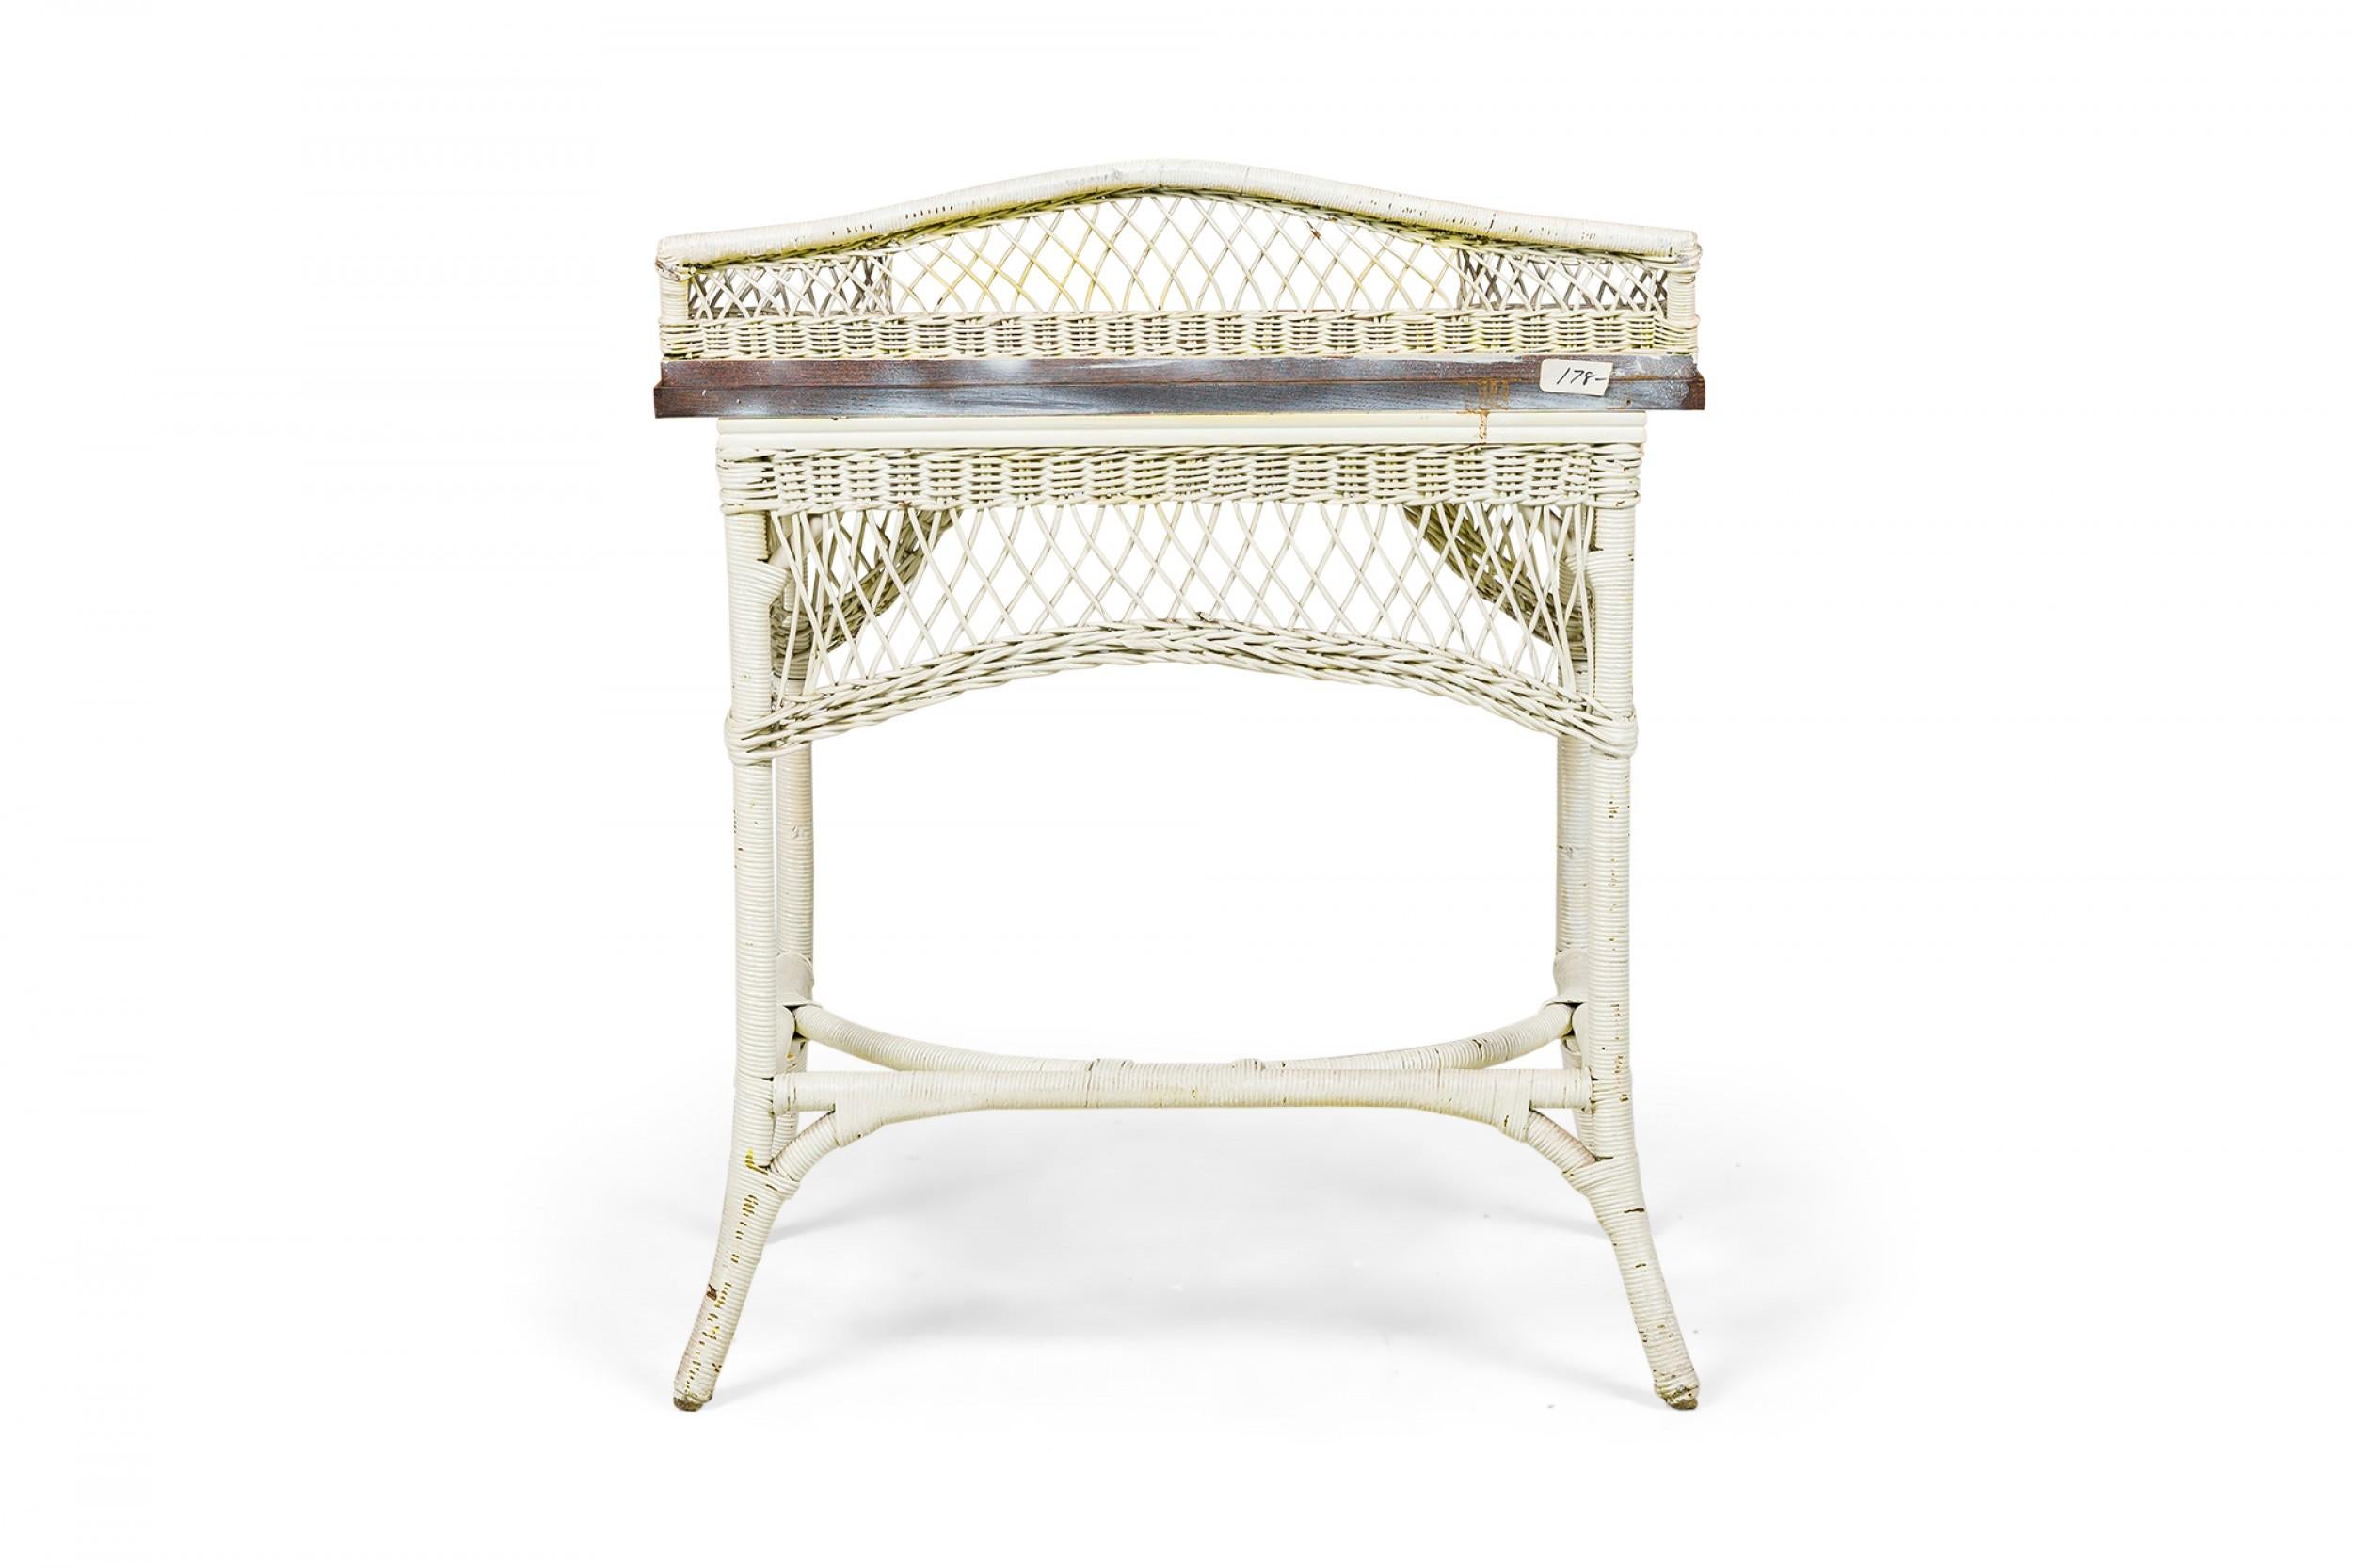 20th Century Mid-Century Victorian-Style White Painted Wicker and Wood Writing Desk For Sale